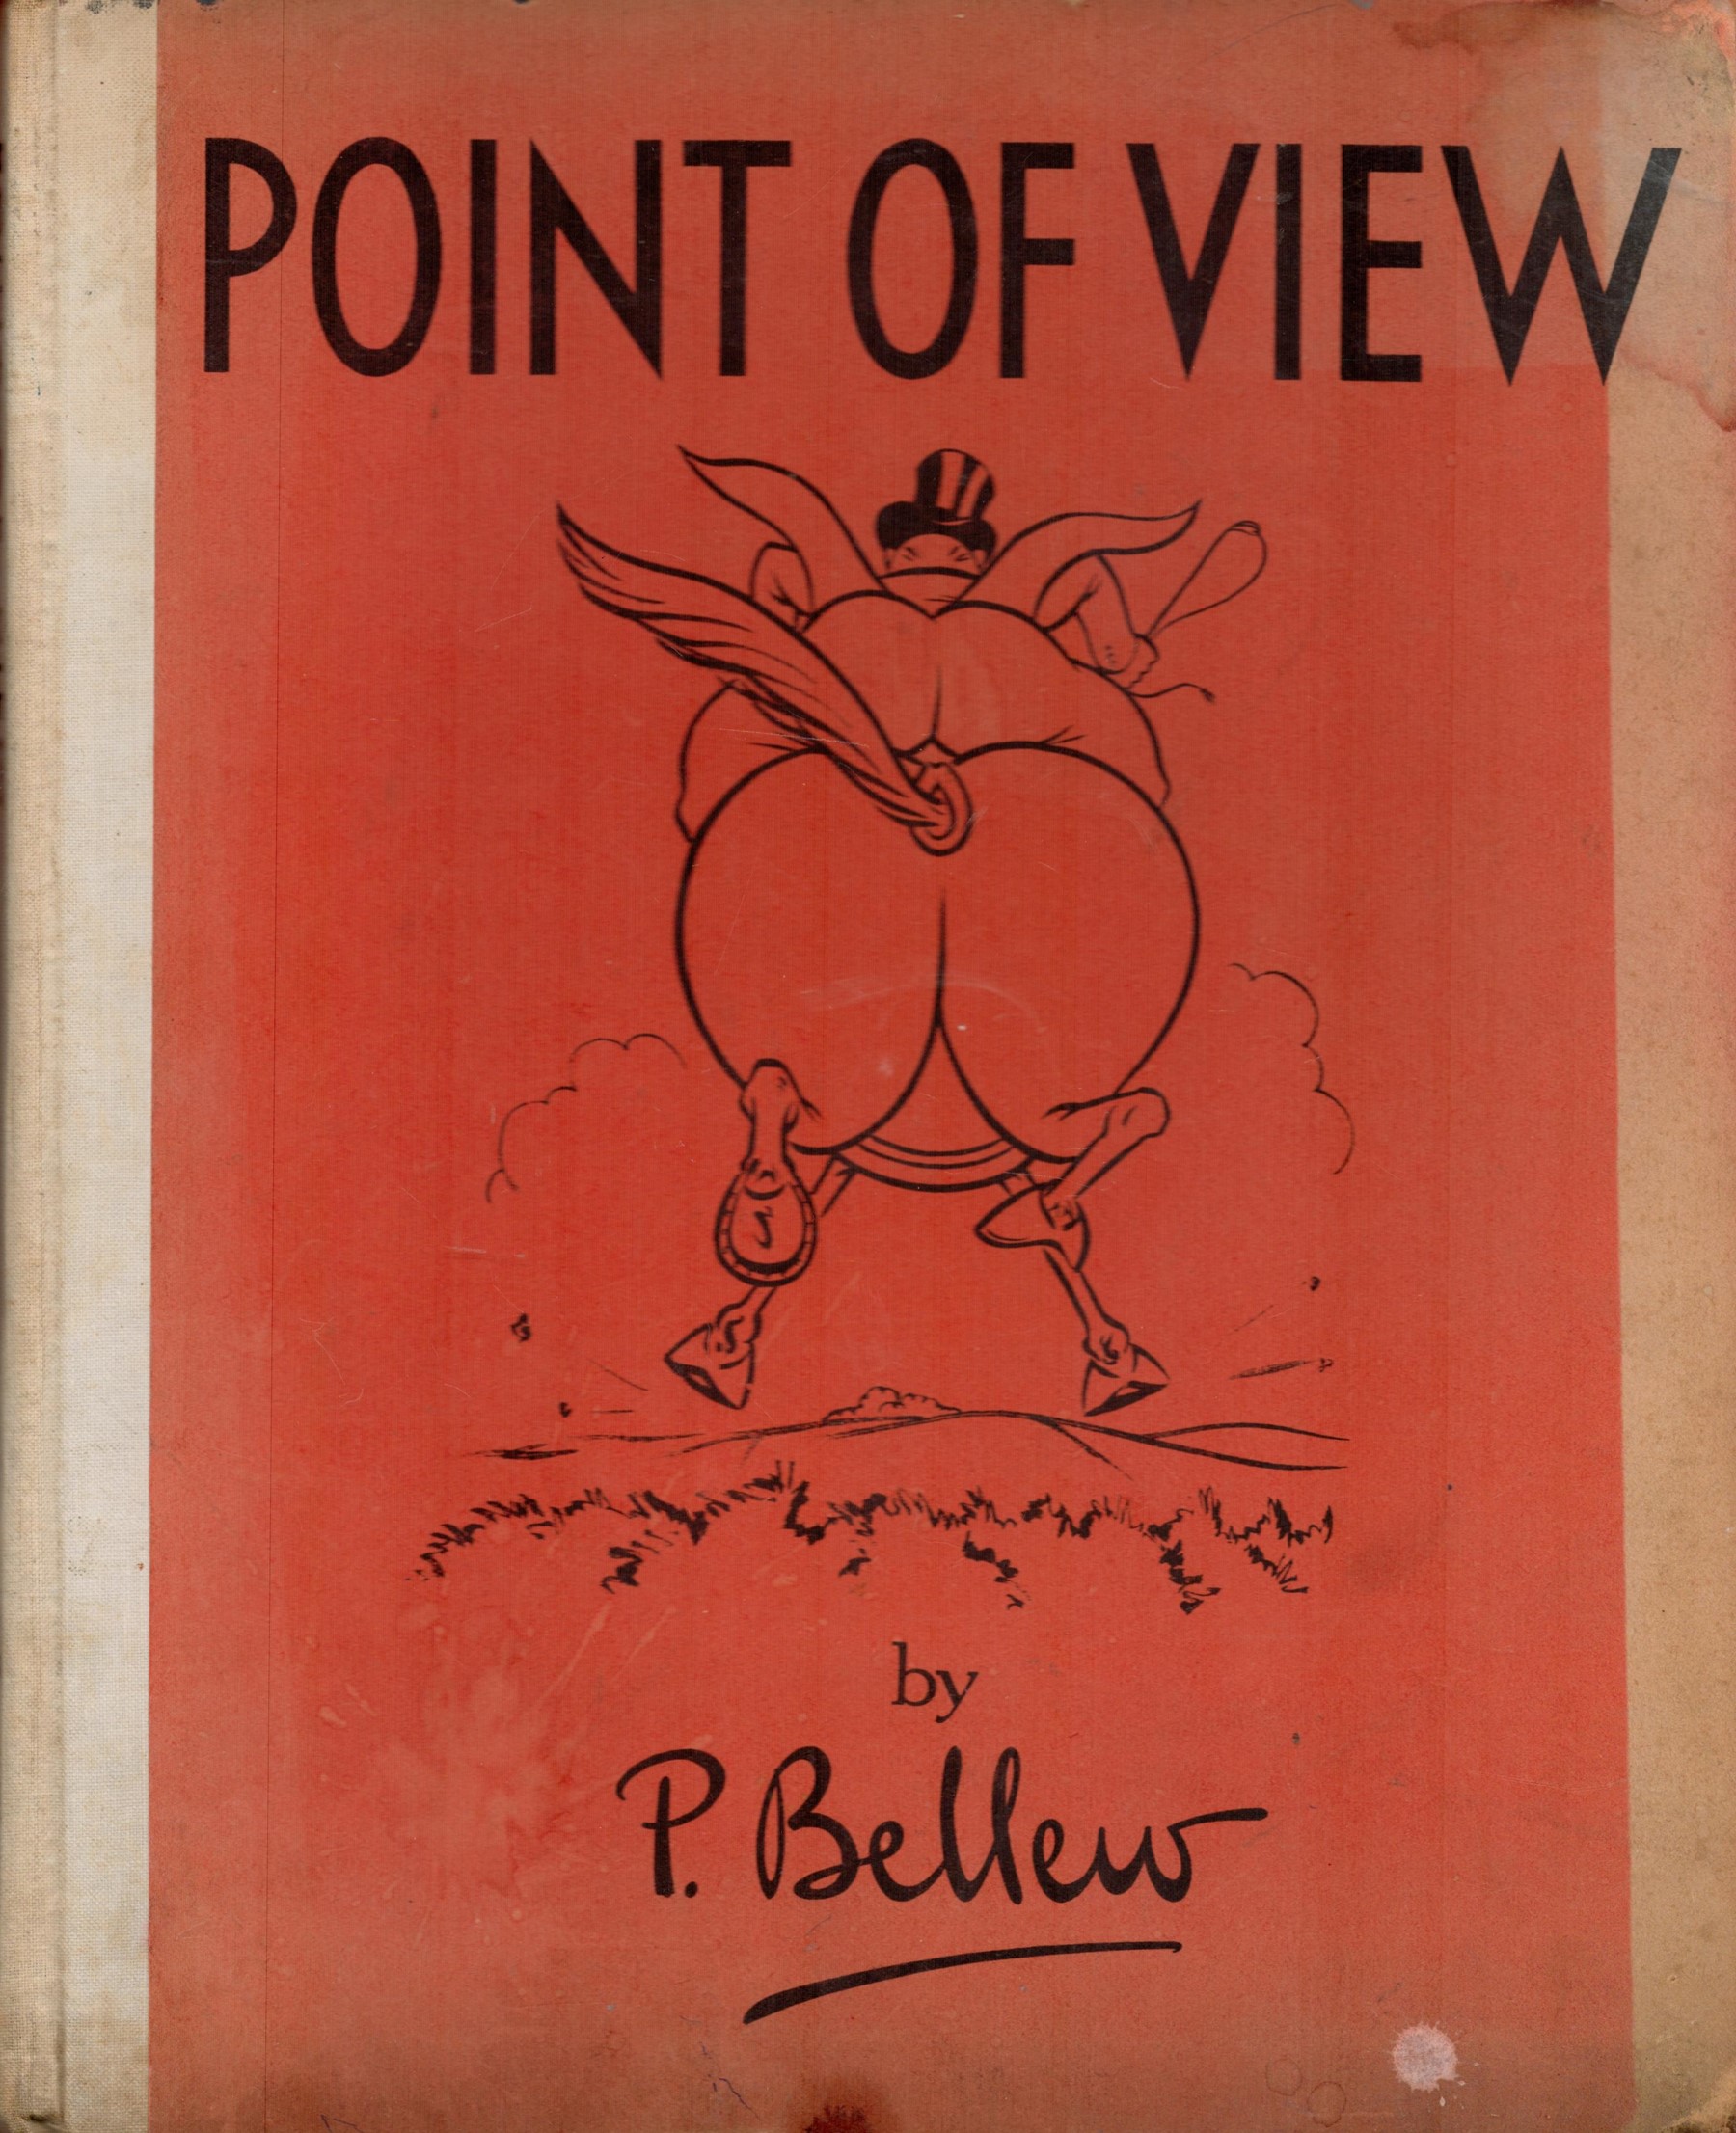 Point of View by P Bellew Hardback Book 1935 First Edition published by Arthur Barker Ltd some